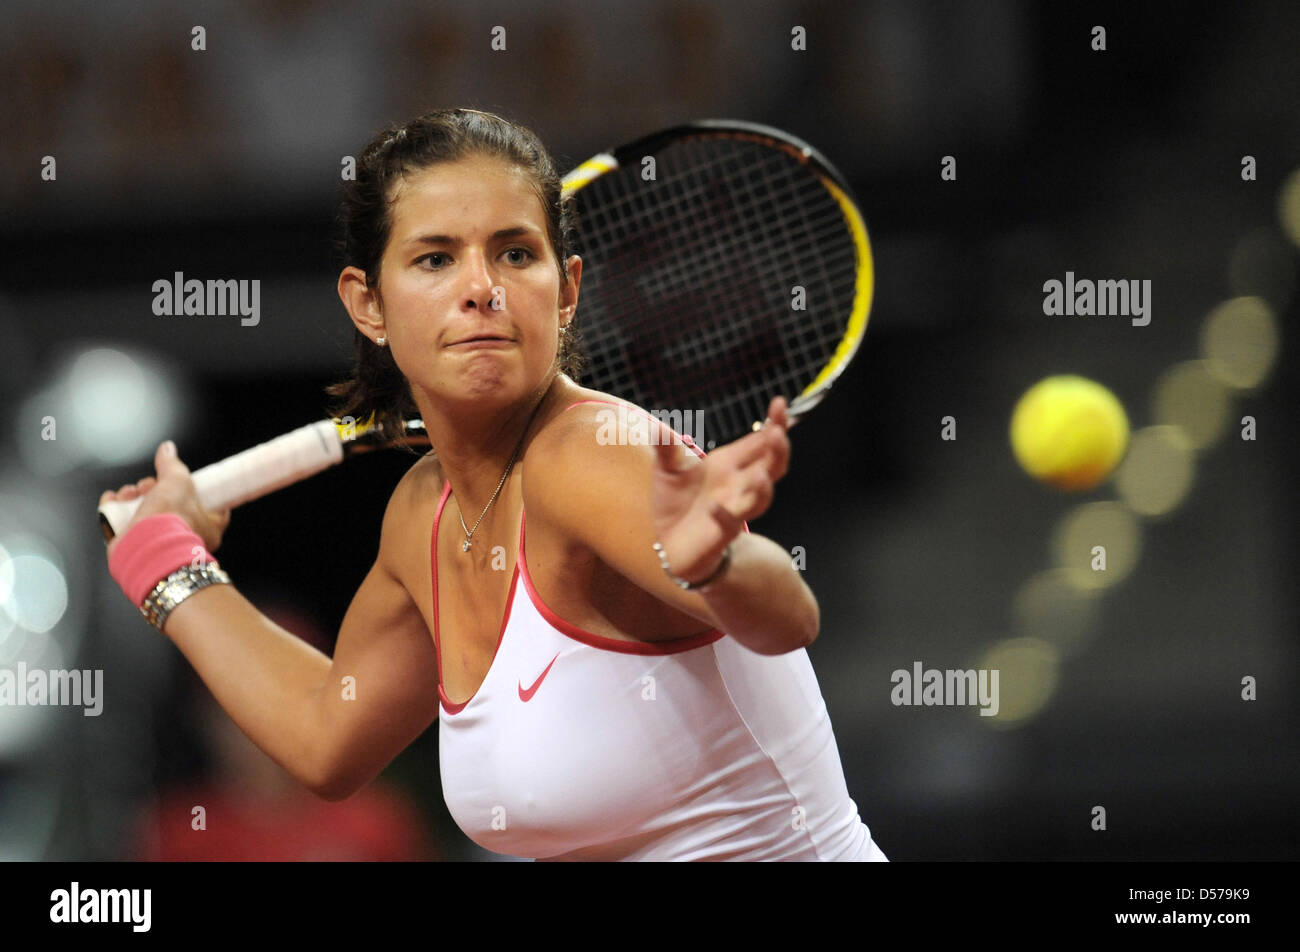 German Julia Goerges plays a forehand during the first round match against  Belgian Henin at the Porsche Tennis Grand Prix WTA tournament at  Porsche-Arena in Stuttgart, Germany, 28 April 2010. Photo: MARIJAN